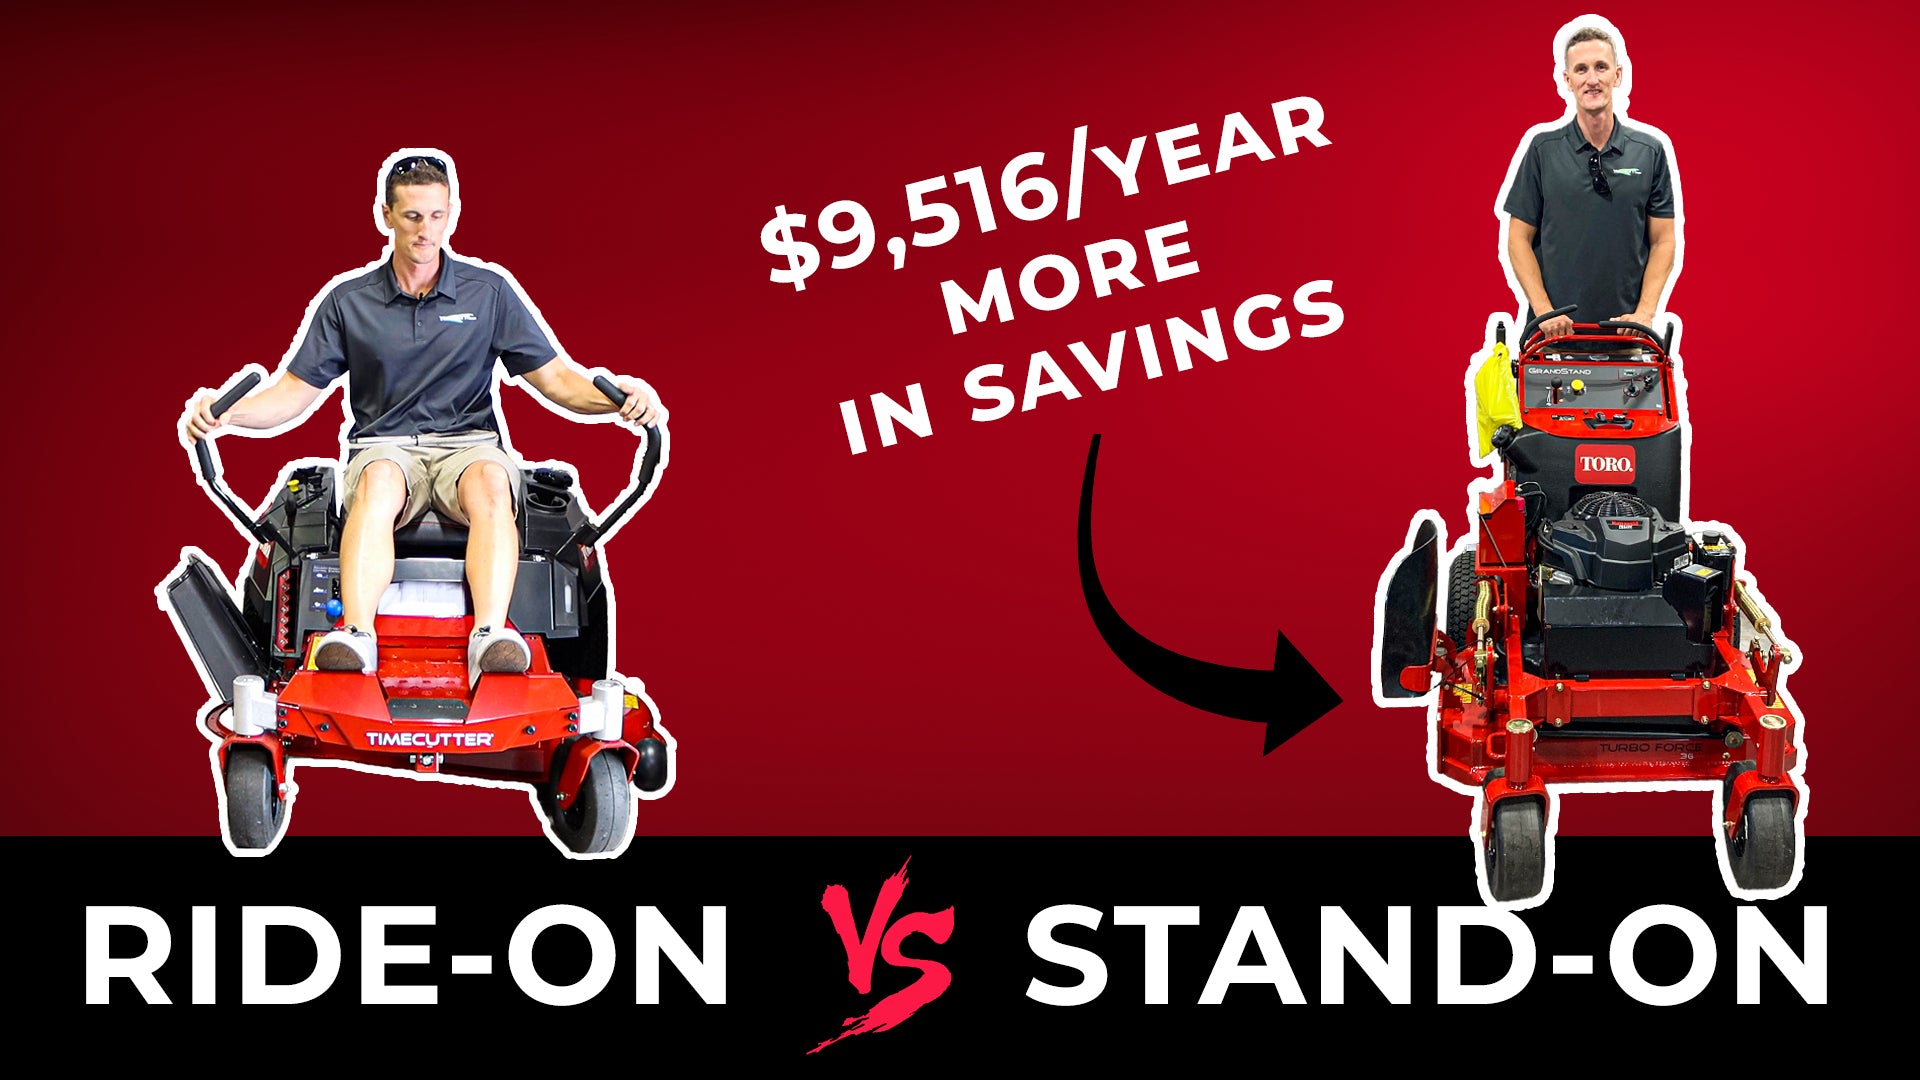 Discover how switching to a stand-on mower can save you $9,516 a year! 🌿 #SmartSavings #LawnCareSavings #CostEffective